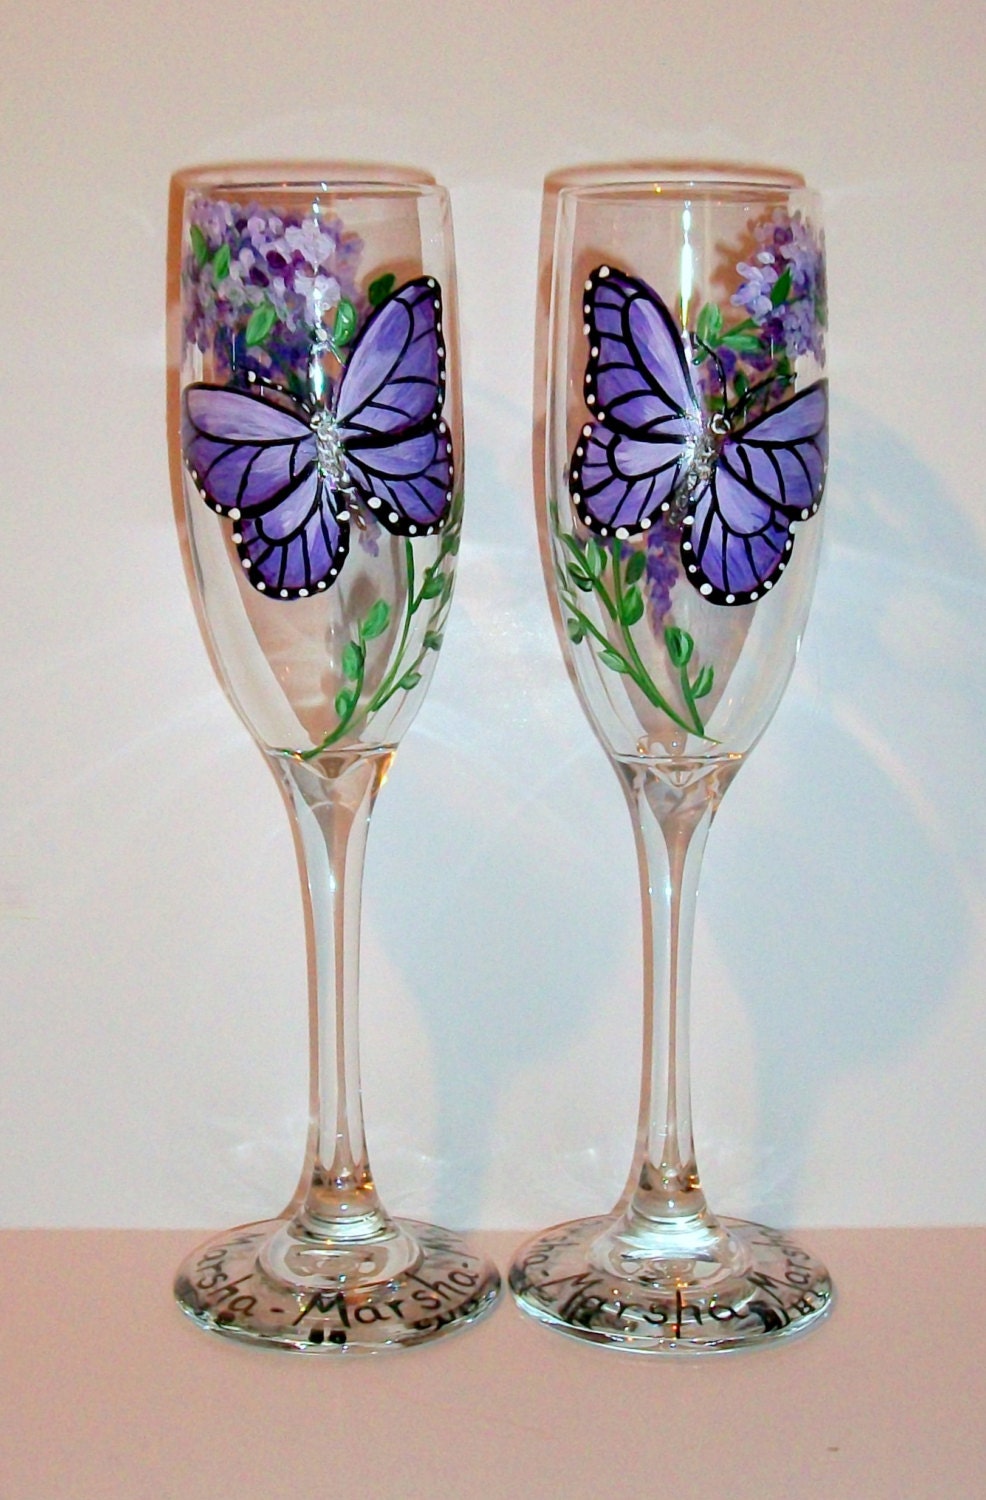 Purple Butterflies and Wisteria Hand Painted Champagne Flutes | Etsy